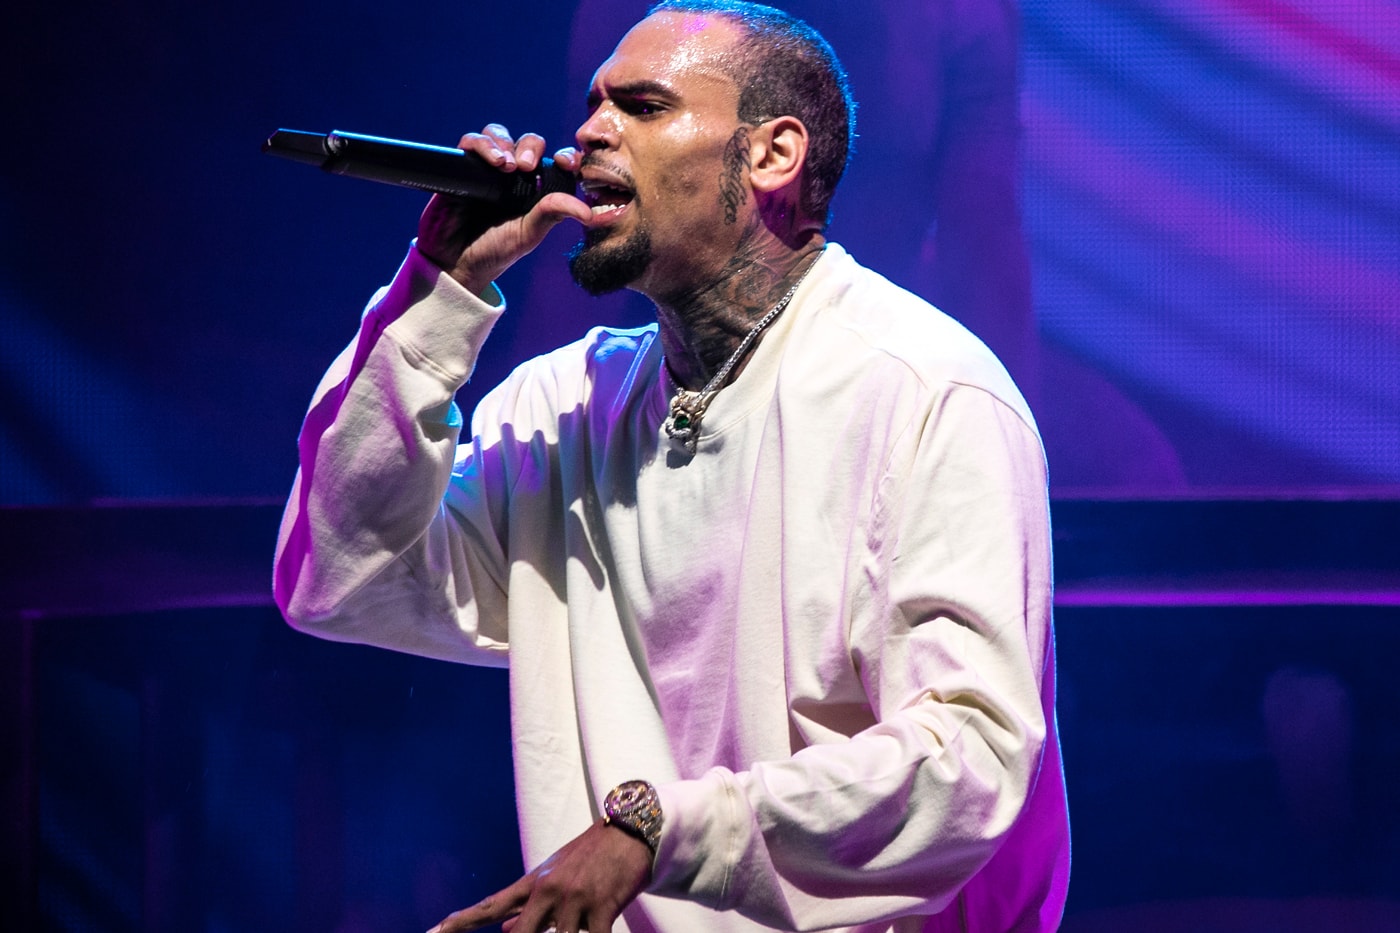 Chris Brown Possible Charges Over Pet Monkey Info music rapper singer TMZ 